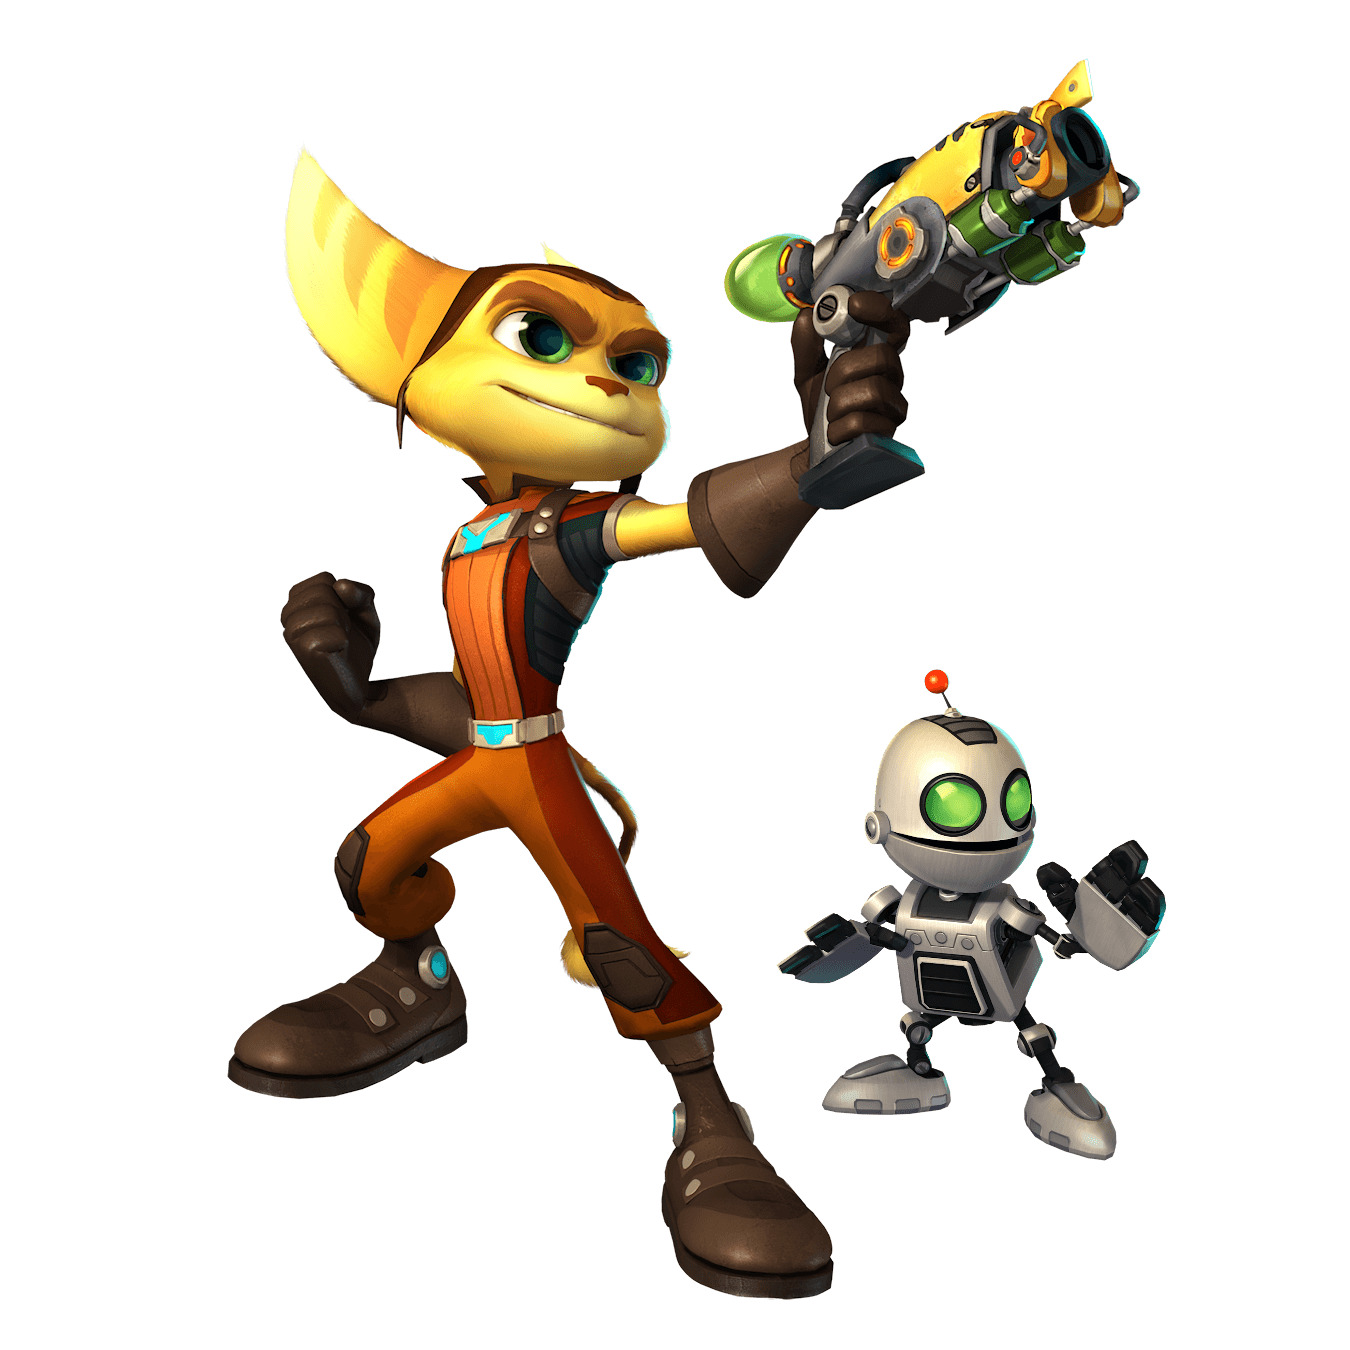 Ratchet Clank Duo icons